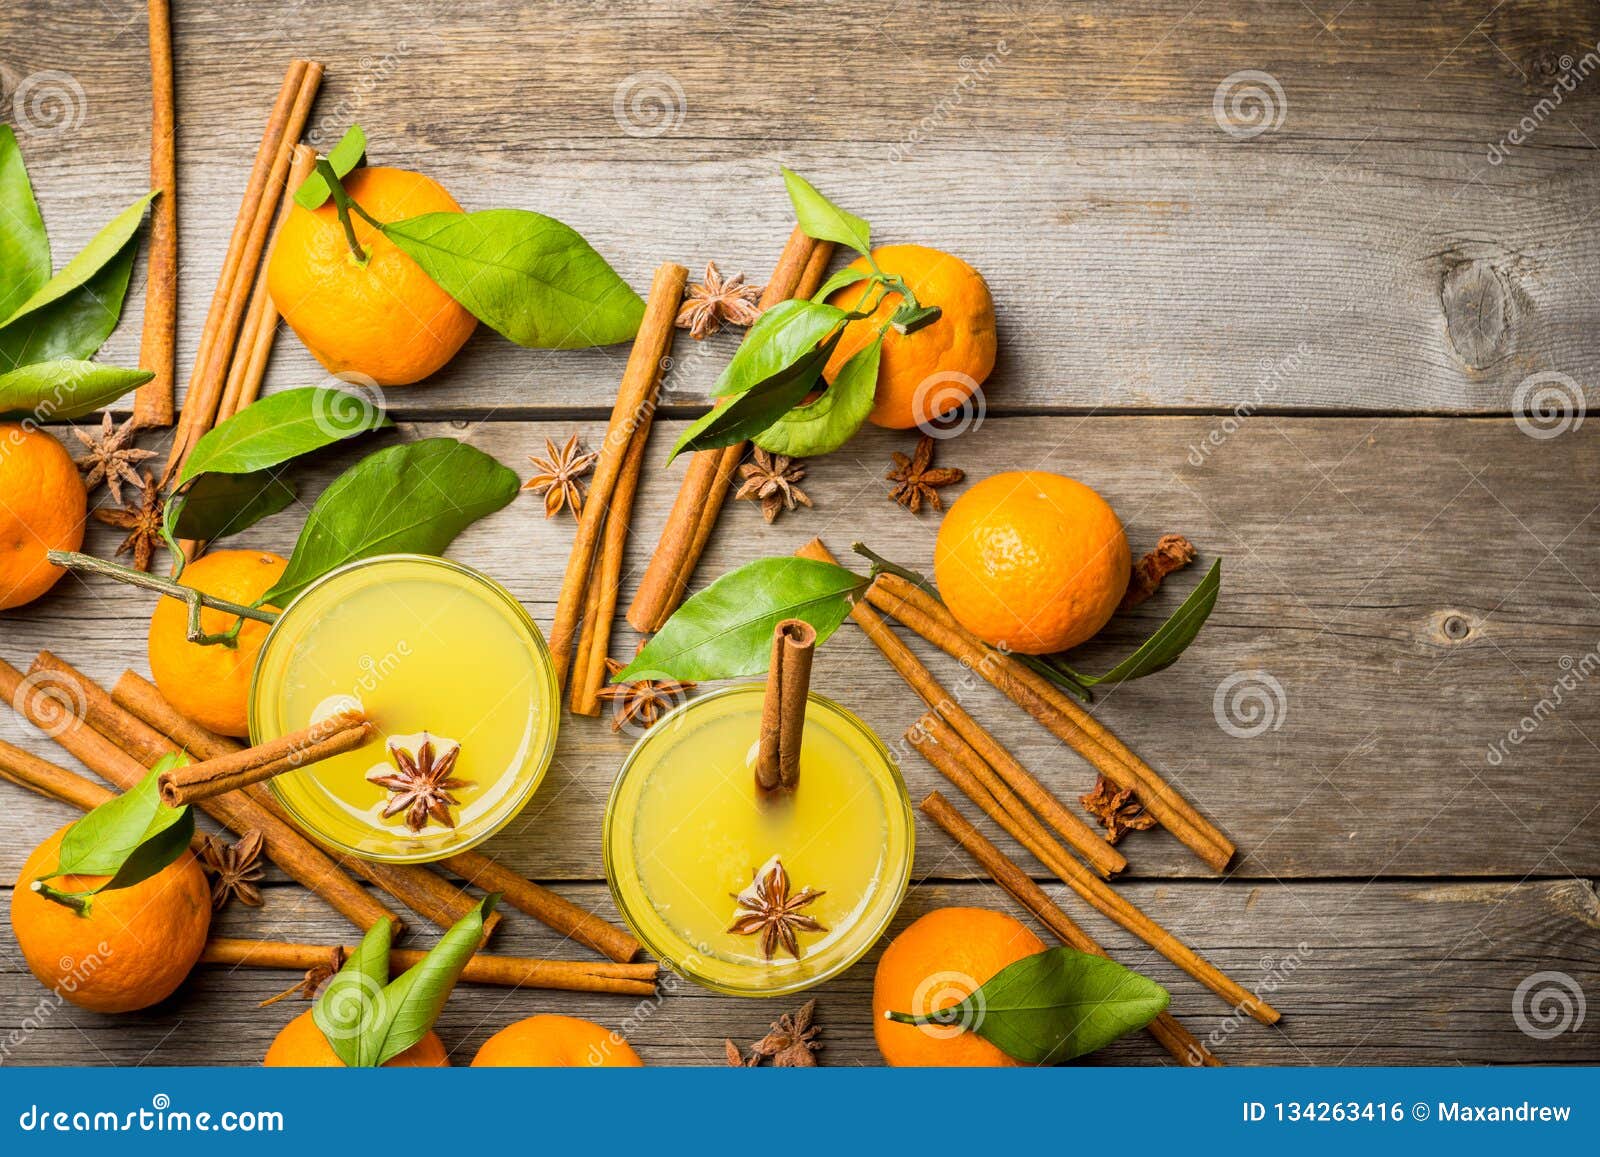 Old Fashioned Citrus Beverage with Spices Stock Photo - Image of rustic ...